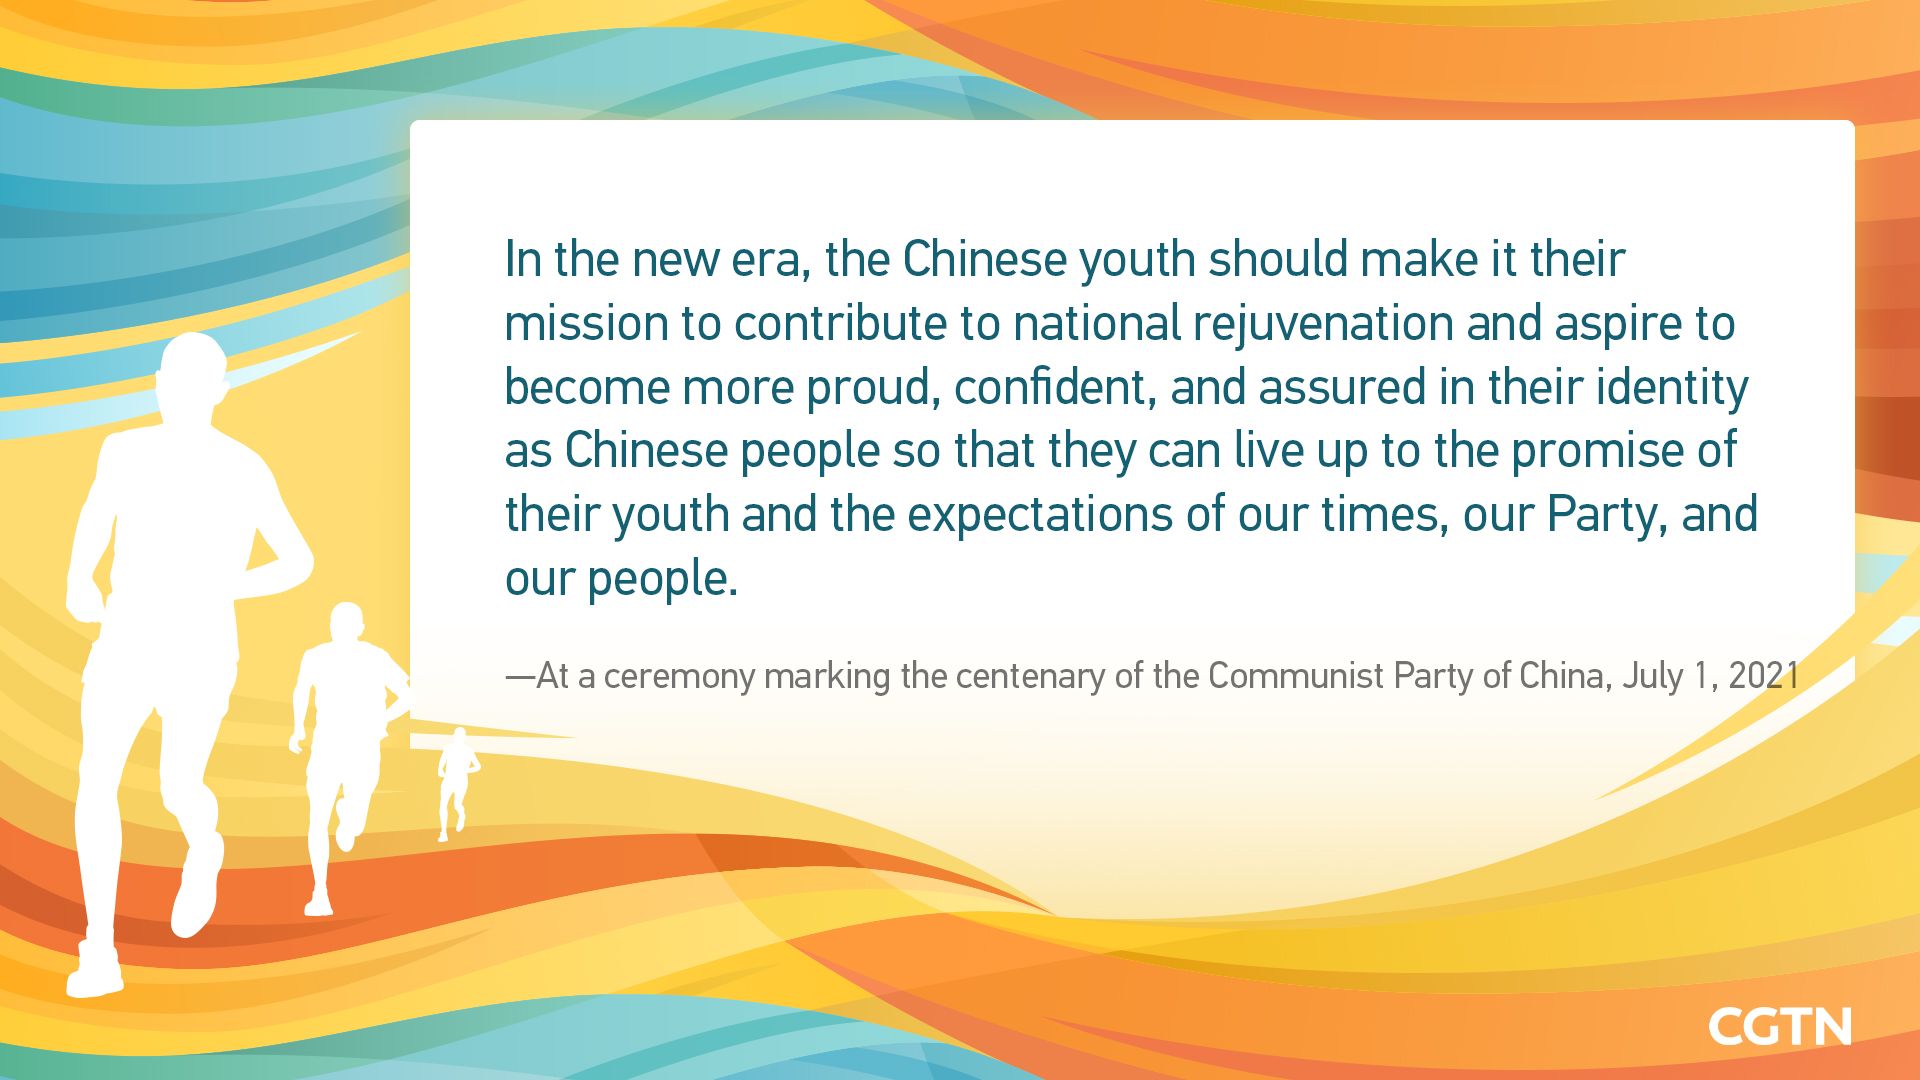 How does Xi Jinping encourage Chinese youth to achieve life values?